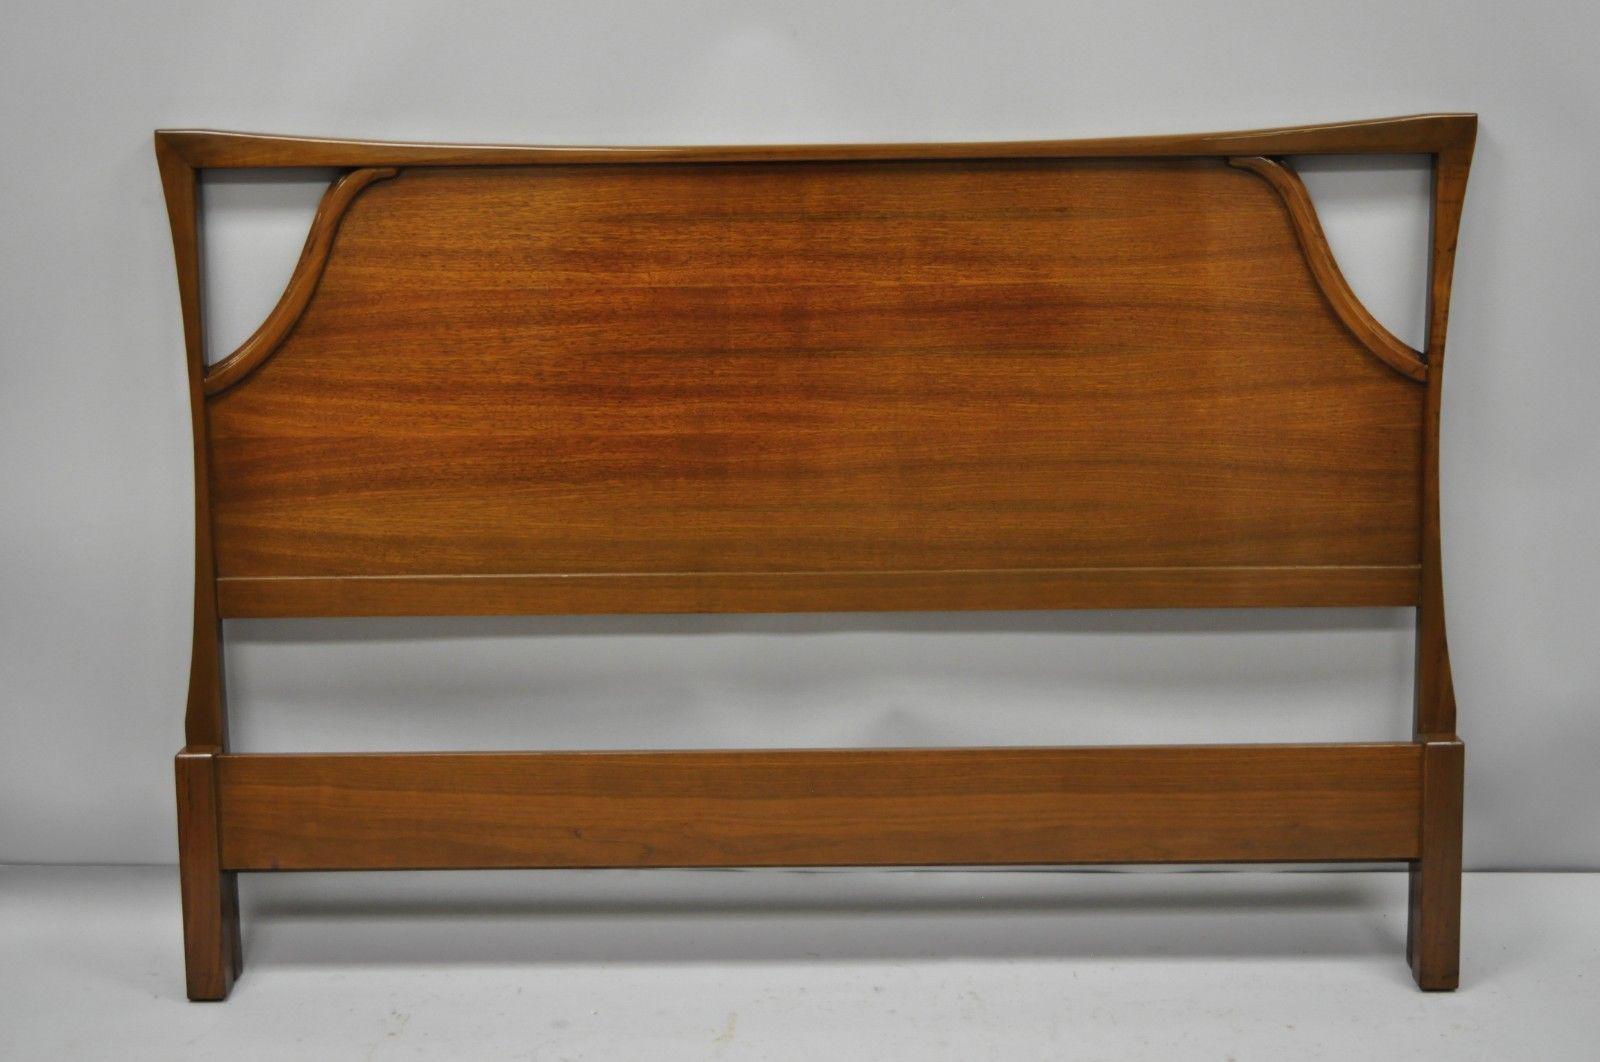 Vintage Mid-Century Modern sculpted walnut full size bed frame. Item features a headboard, low sleek foot board, and bed rails with brackets, beautiful wood grain, clean Modernist lines, sleek sculptural lines, circa 1960. Measurements: Headboard